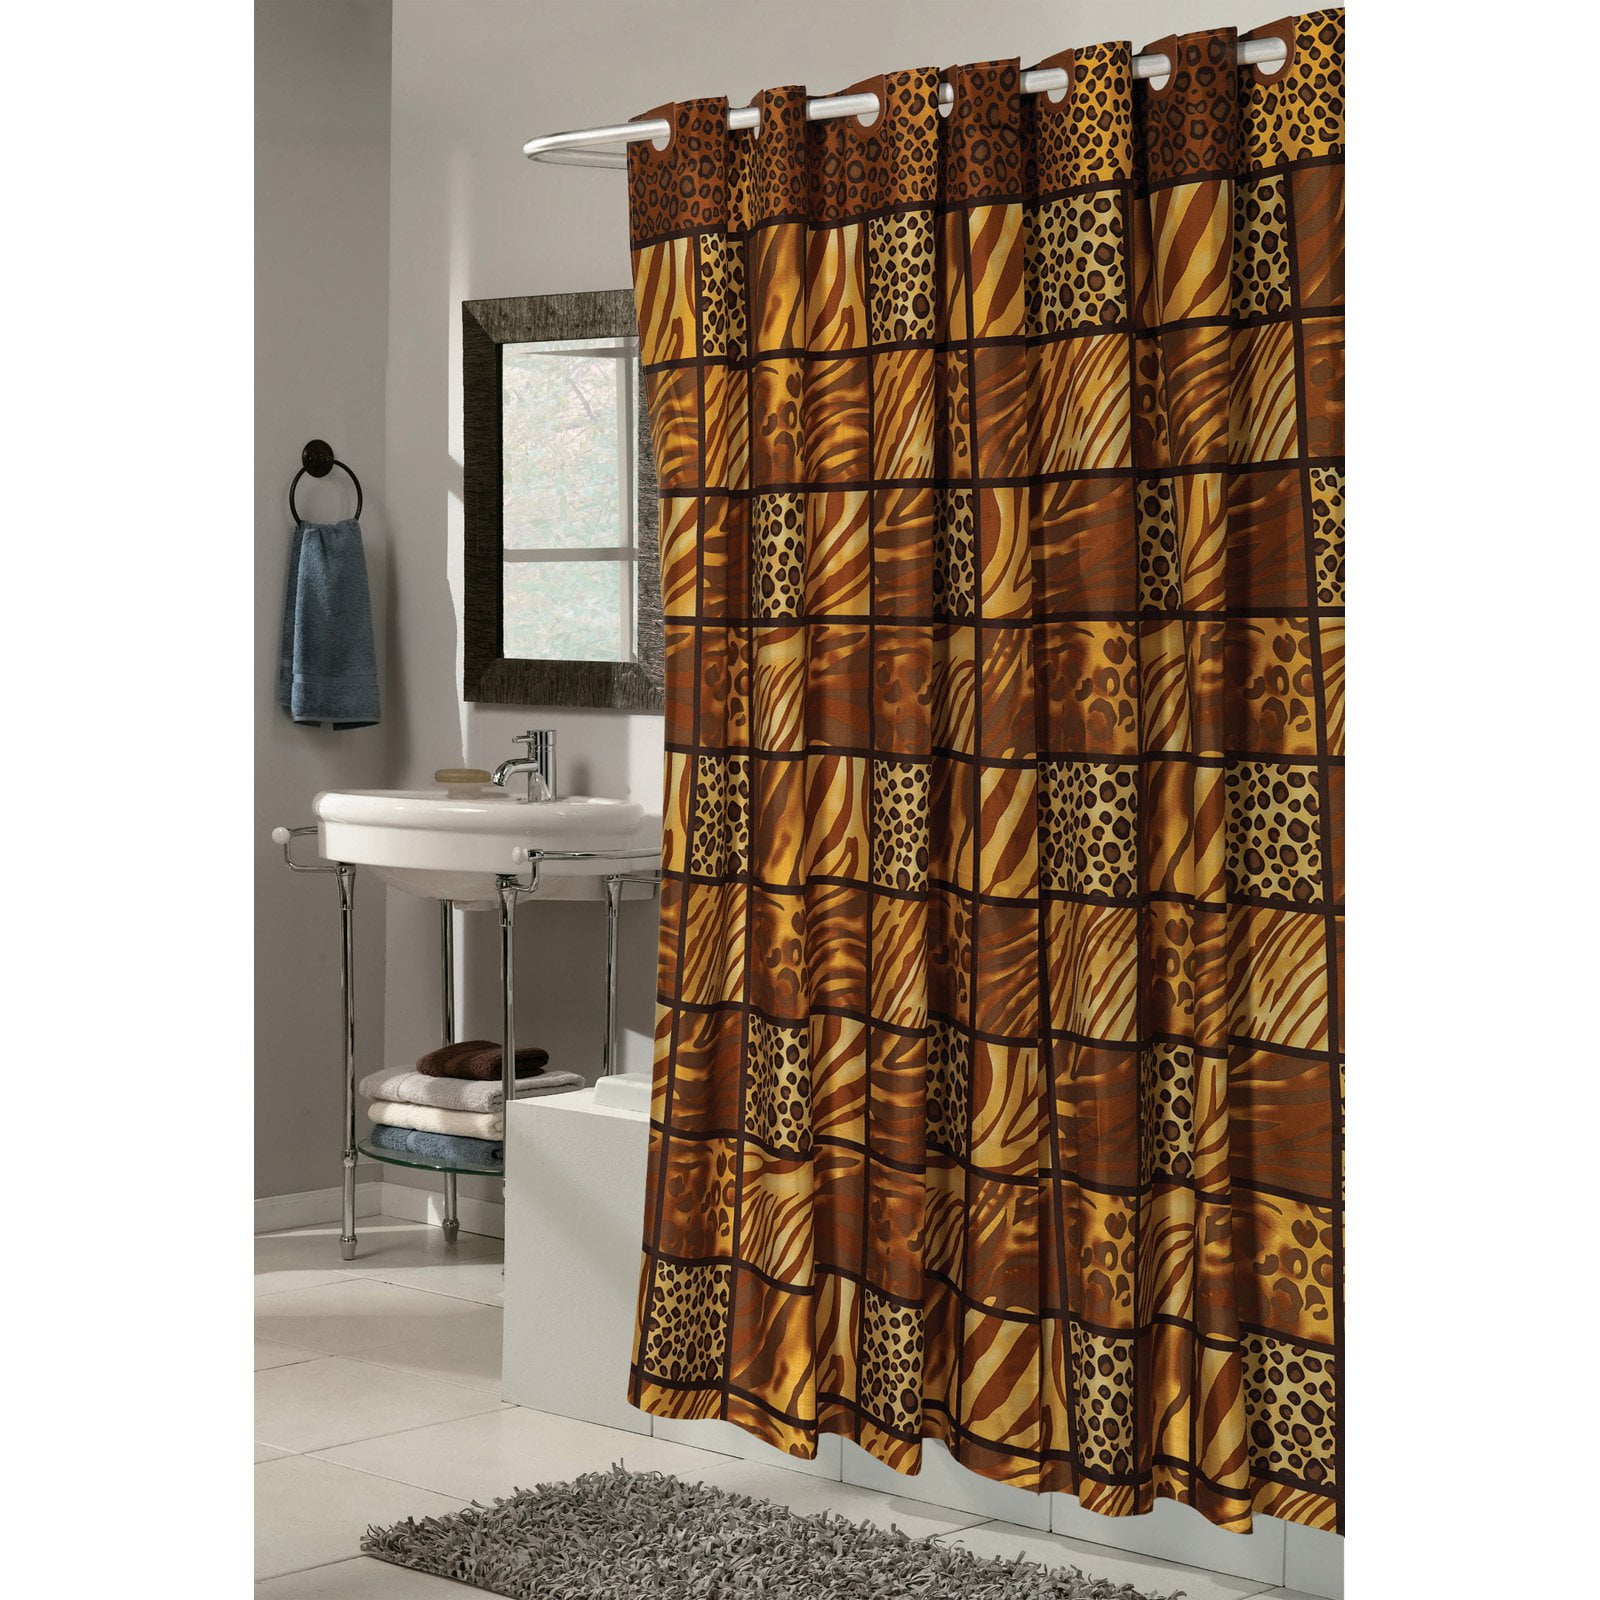 Extra Wide Hookless Fabric Shower Curtain The Best Image Of Curtain